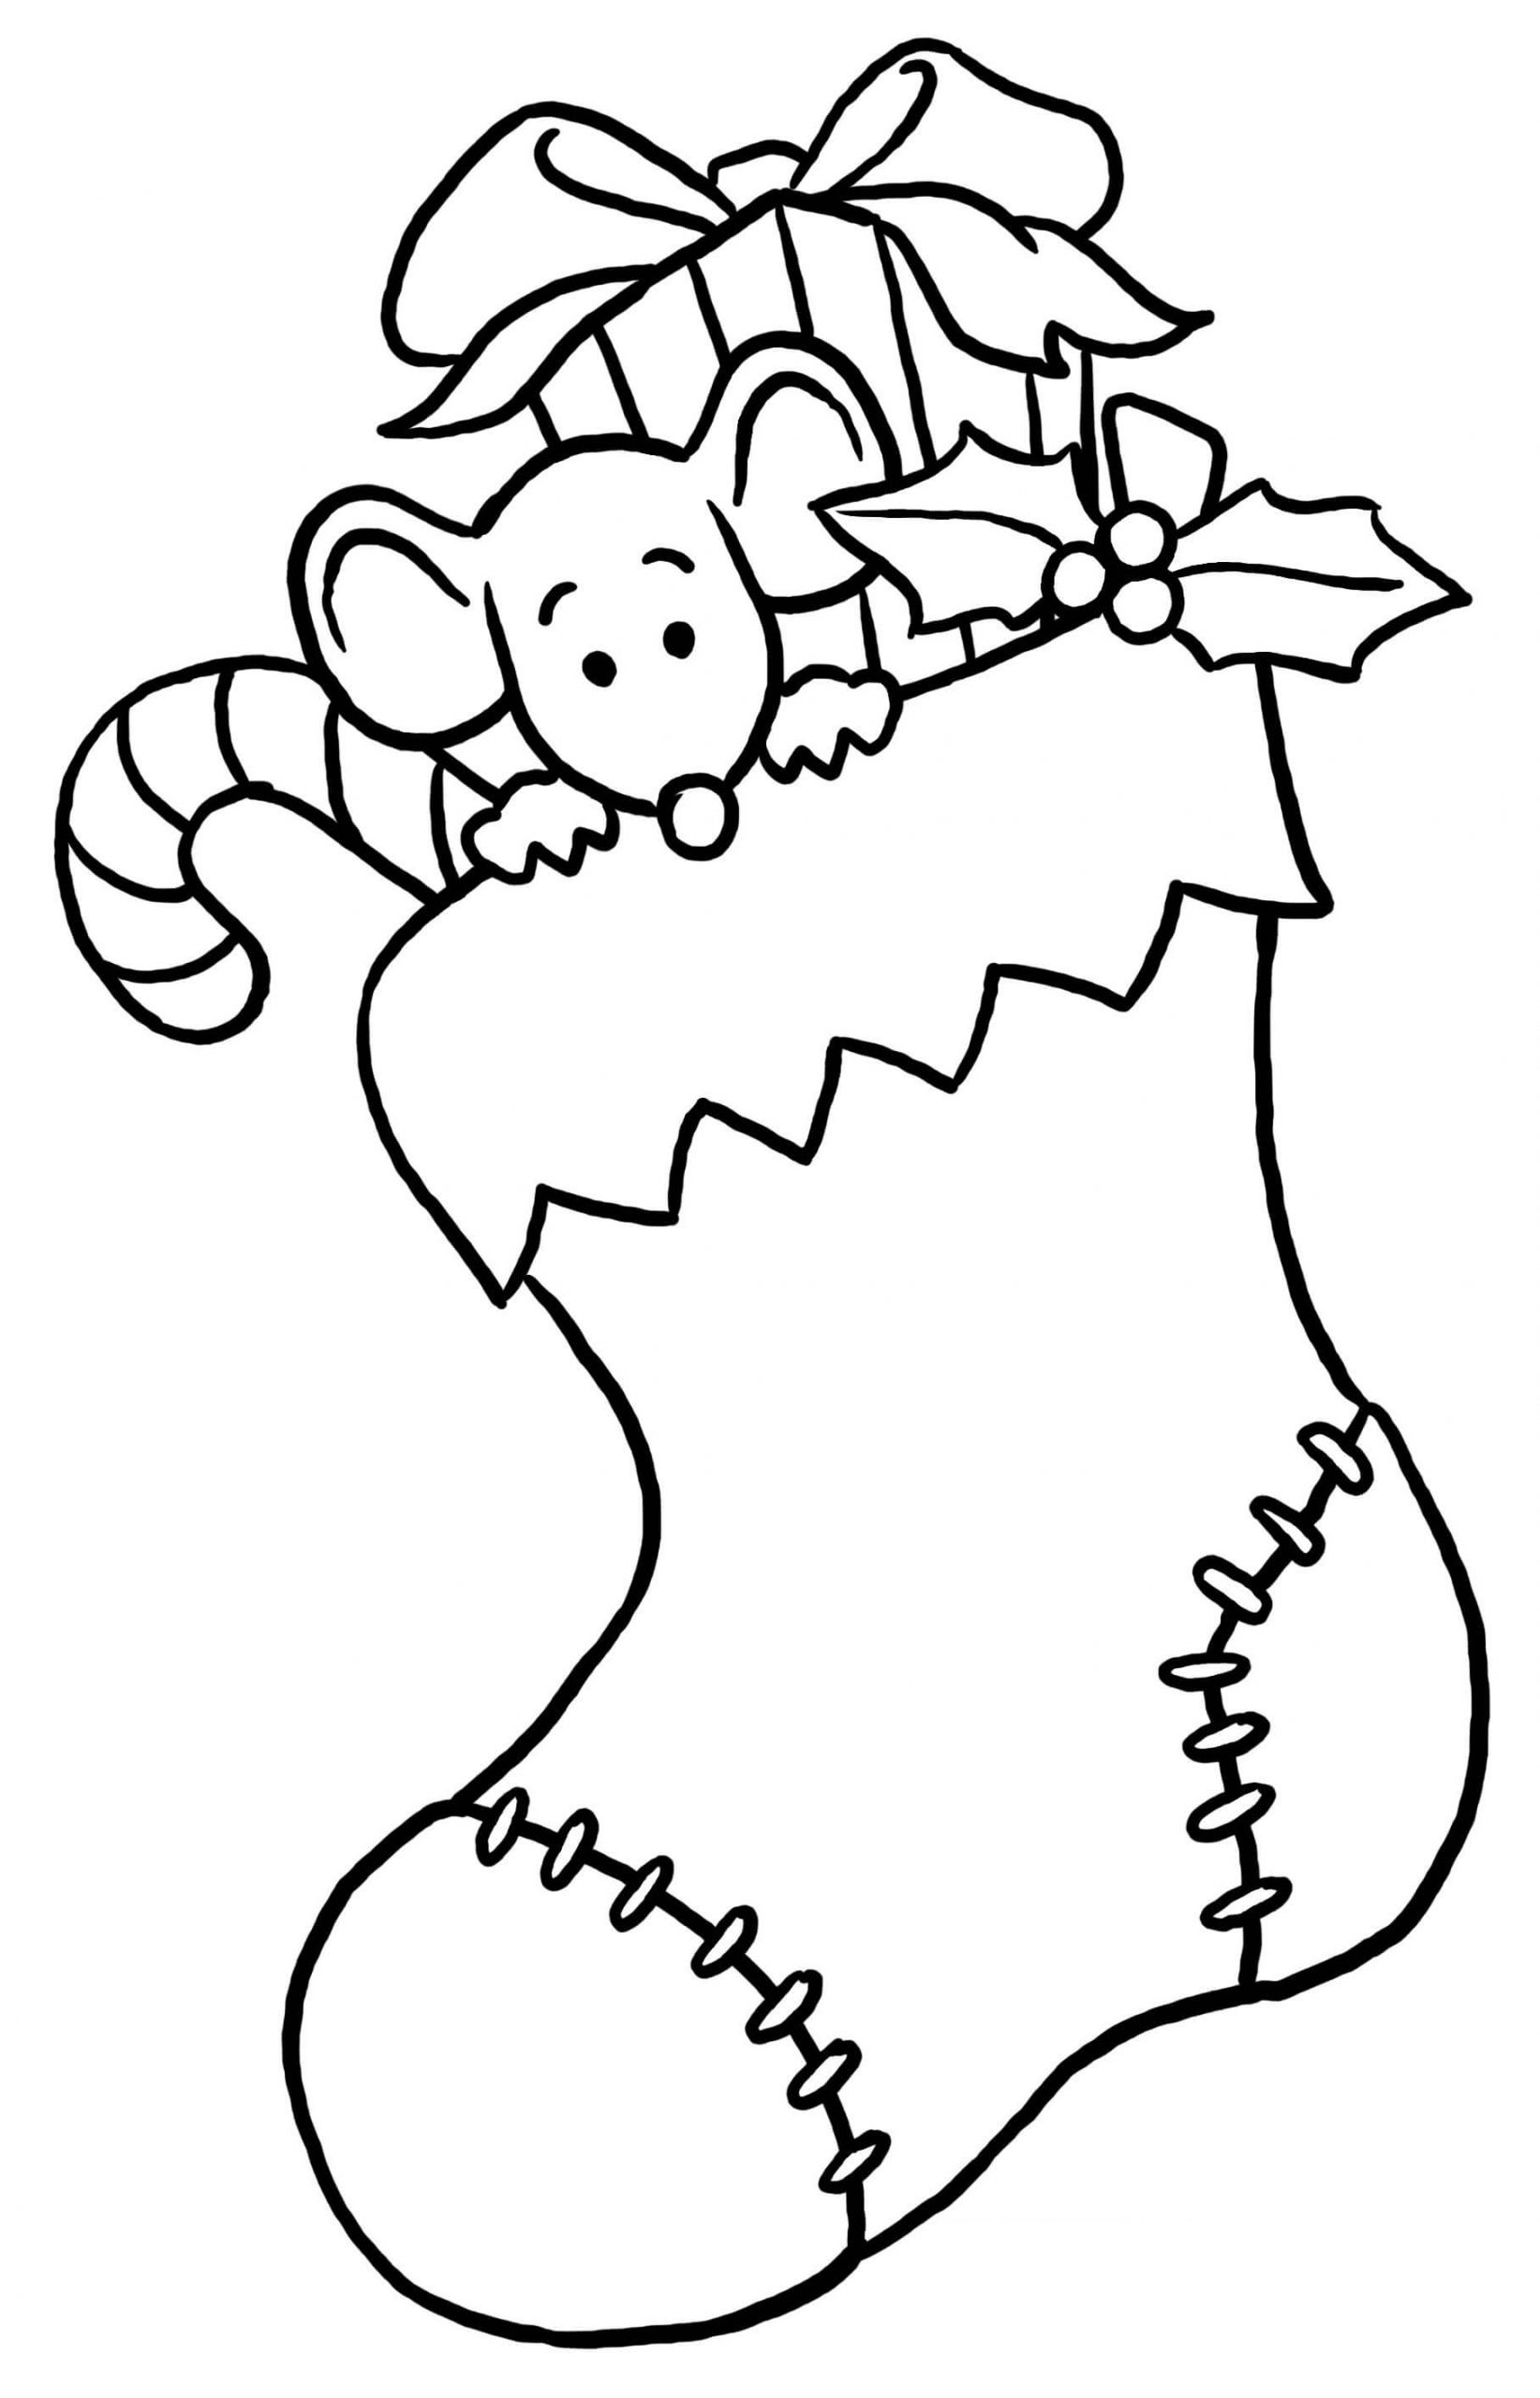 Mouse in Giftbox Stocking coloring page